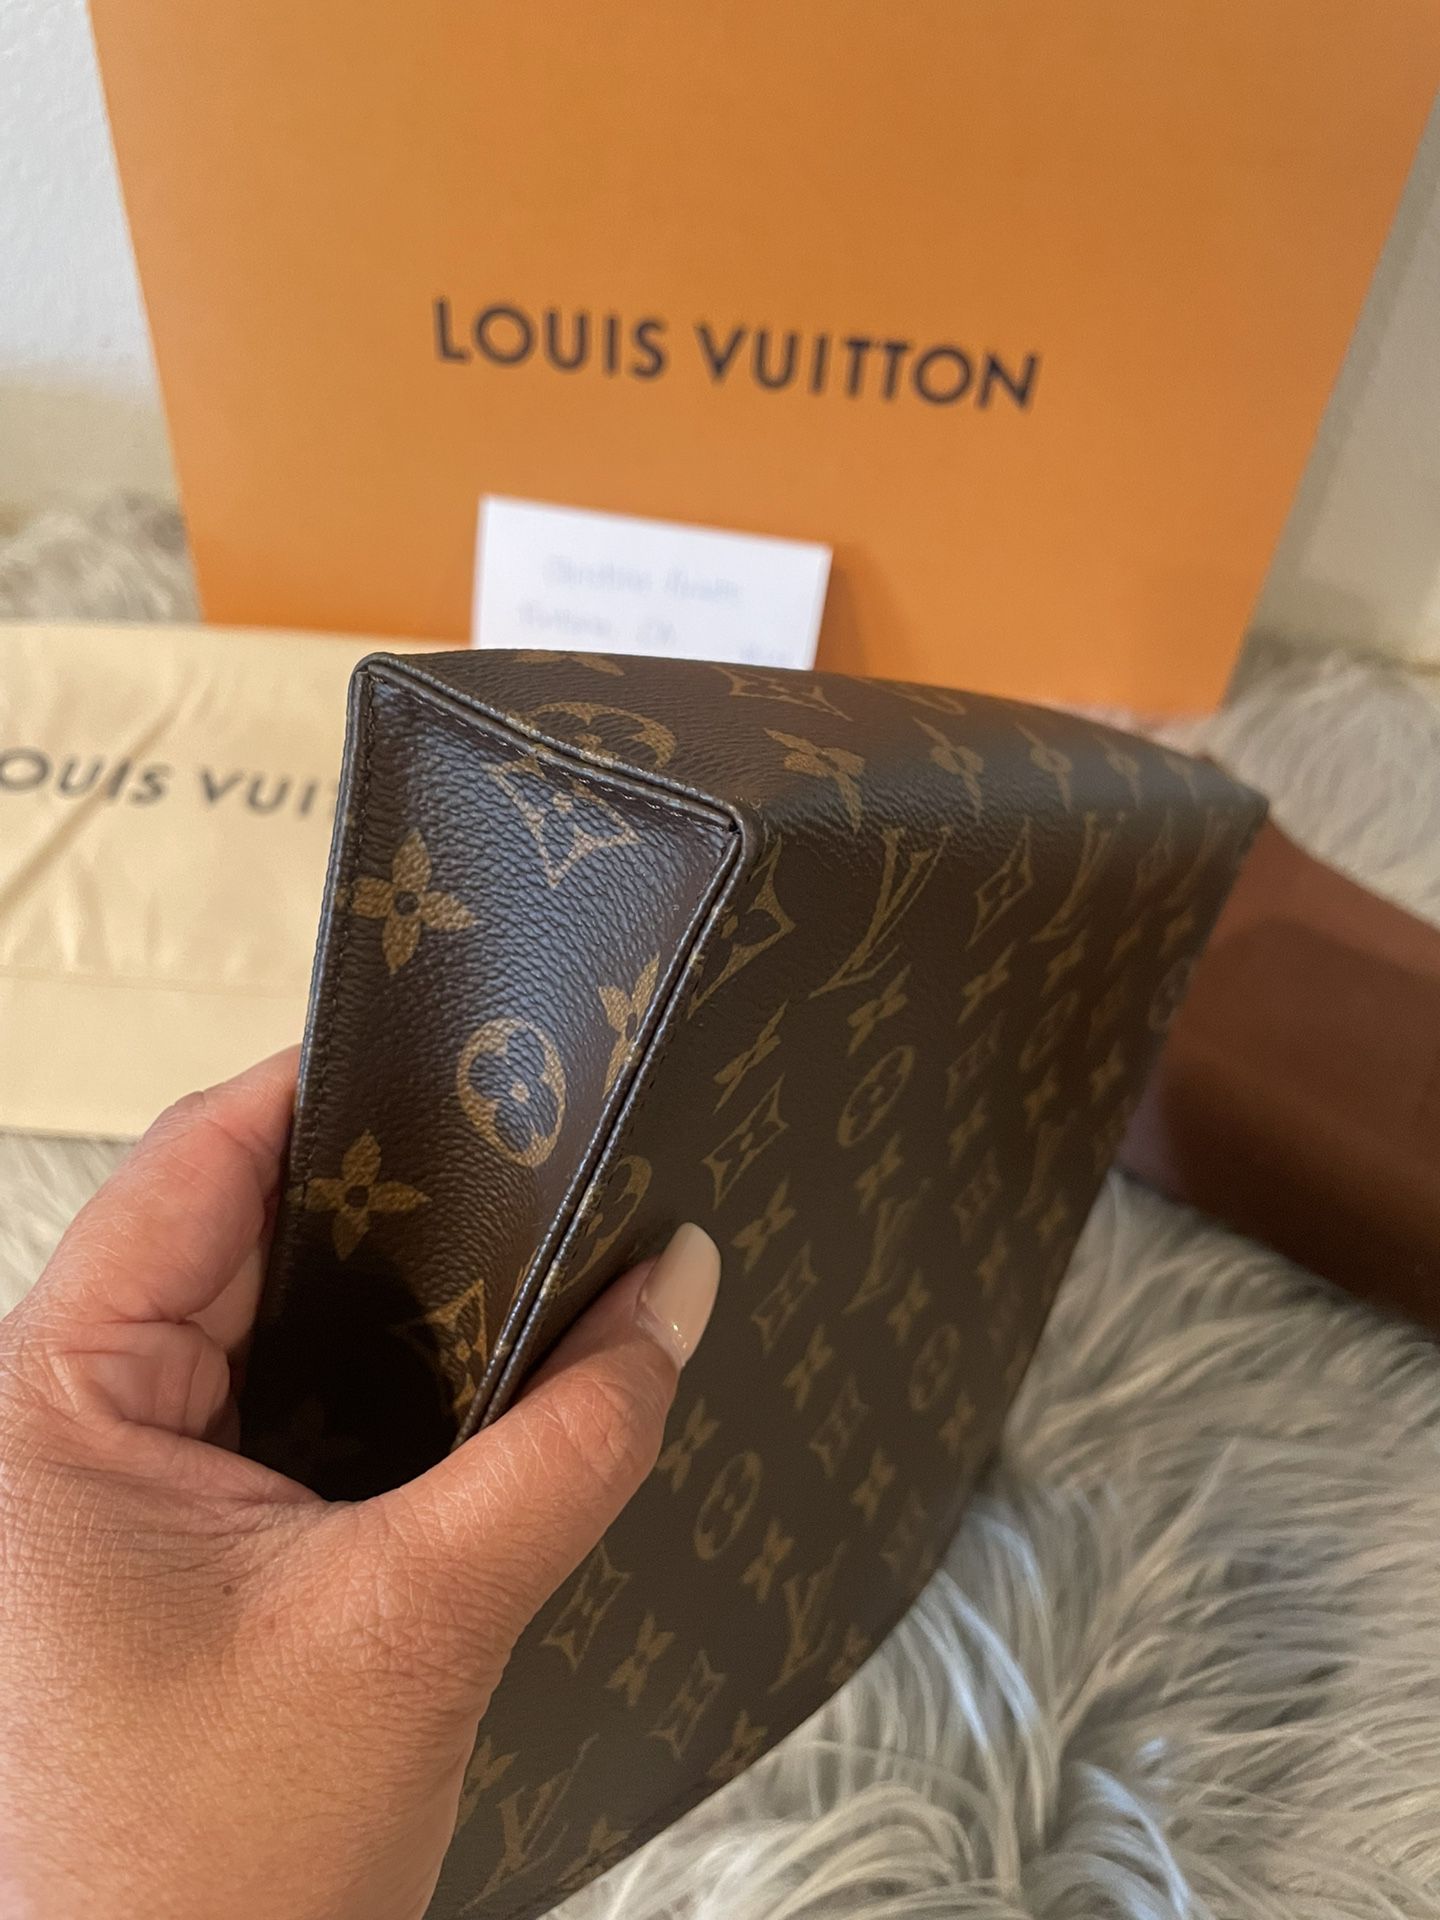 Louis Vuitton Toiletry 26 for Sale in Fontana, CA - OfferUp